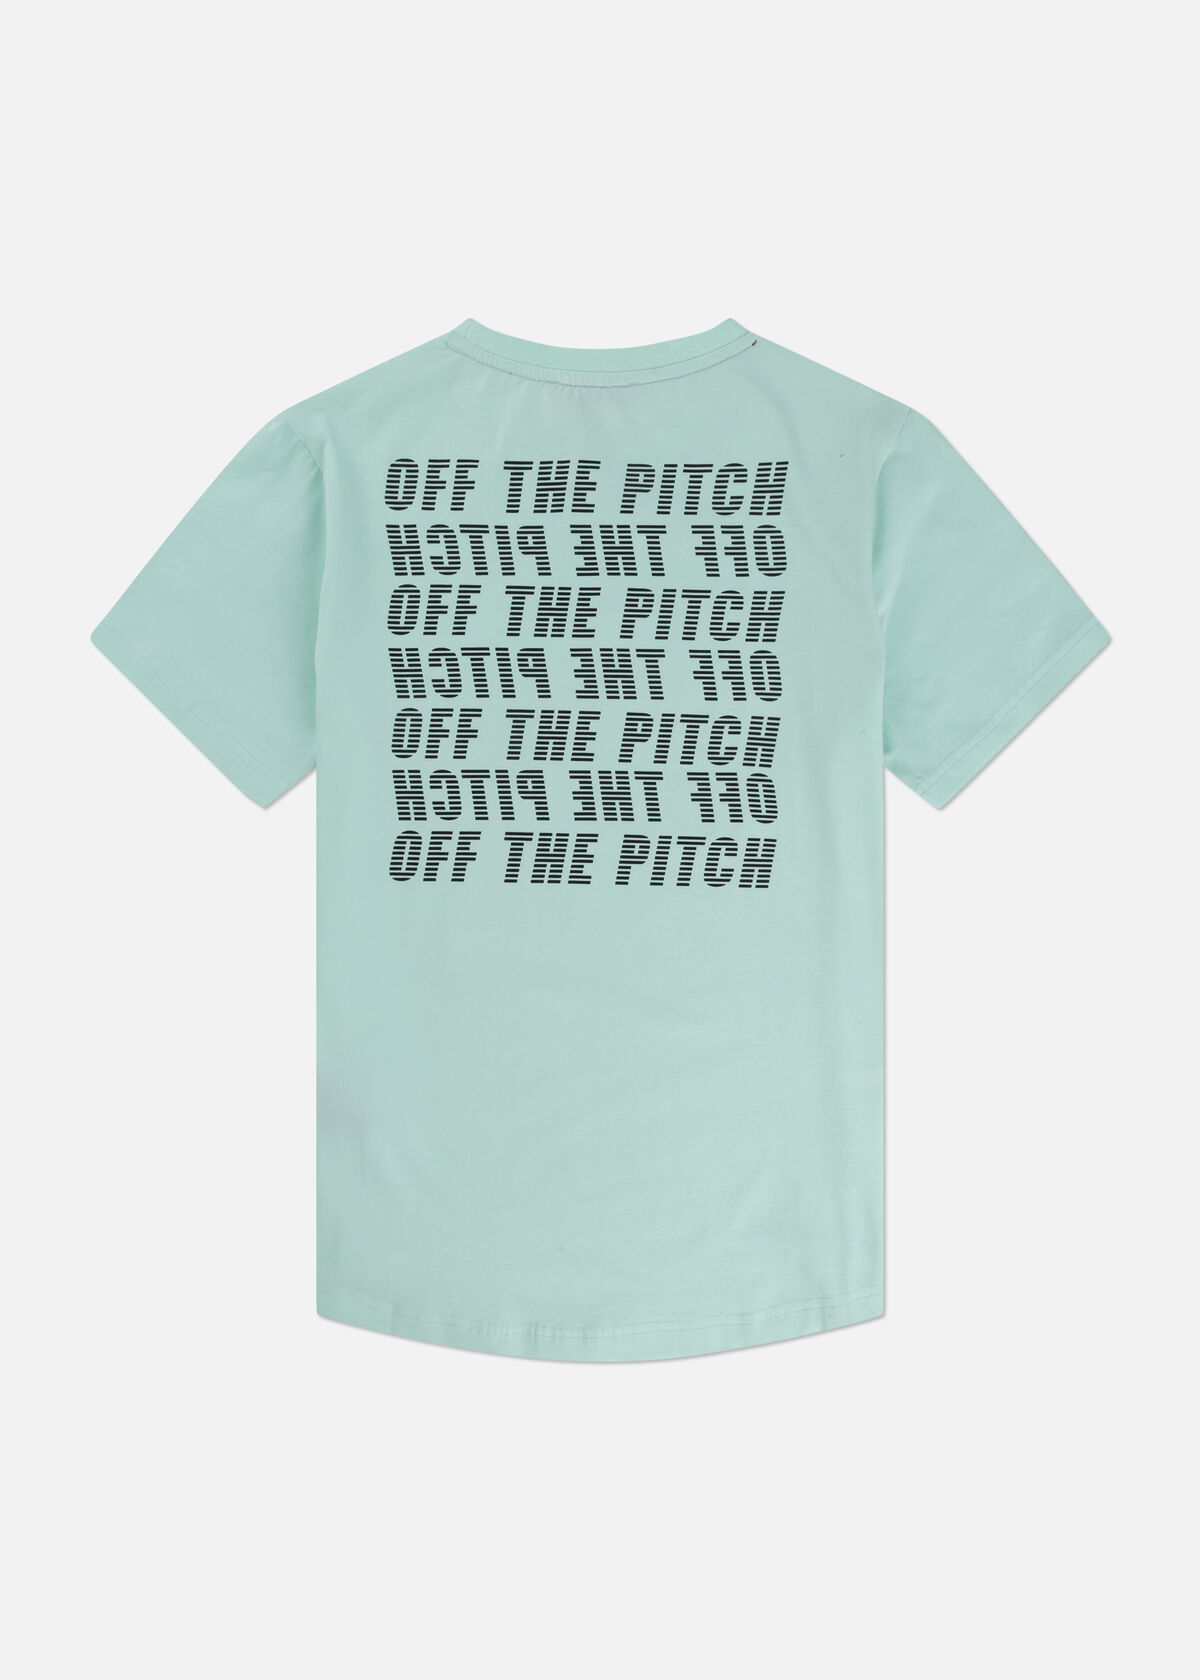 Off the pitch, OTP241056, Duplicate Slim Fit Tee, Jade Mint